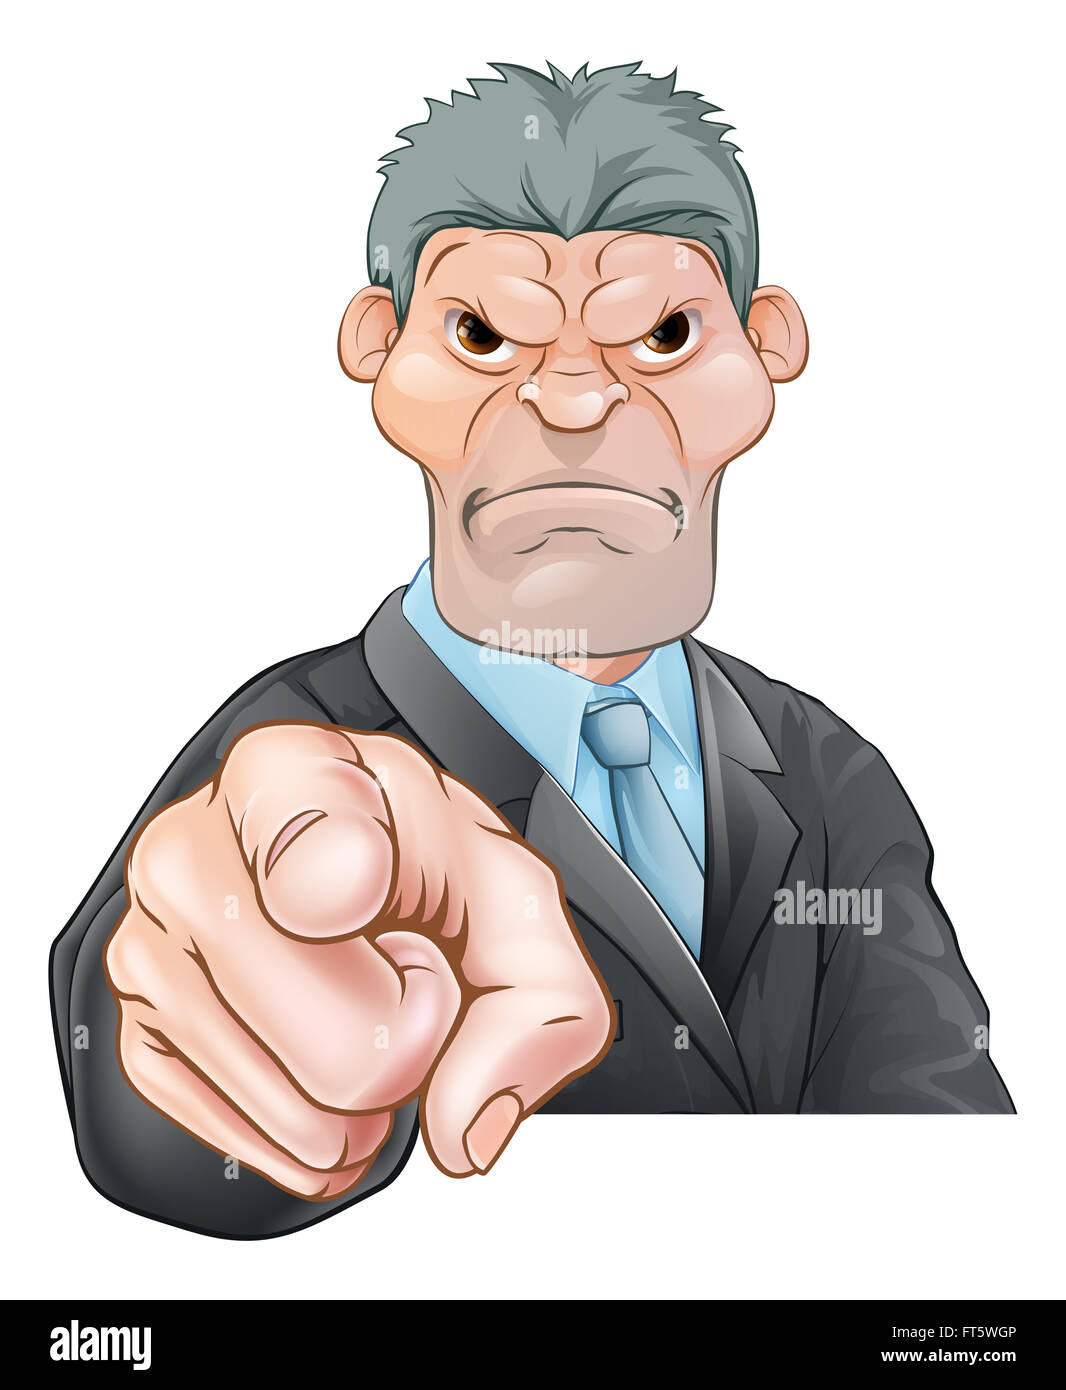 A threatening mean looking cartoon businessman, manager, boss or office bully pointing Stock Photo